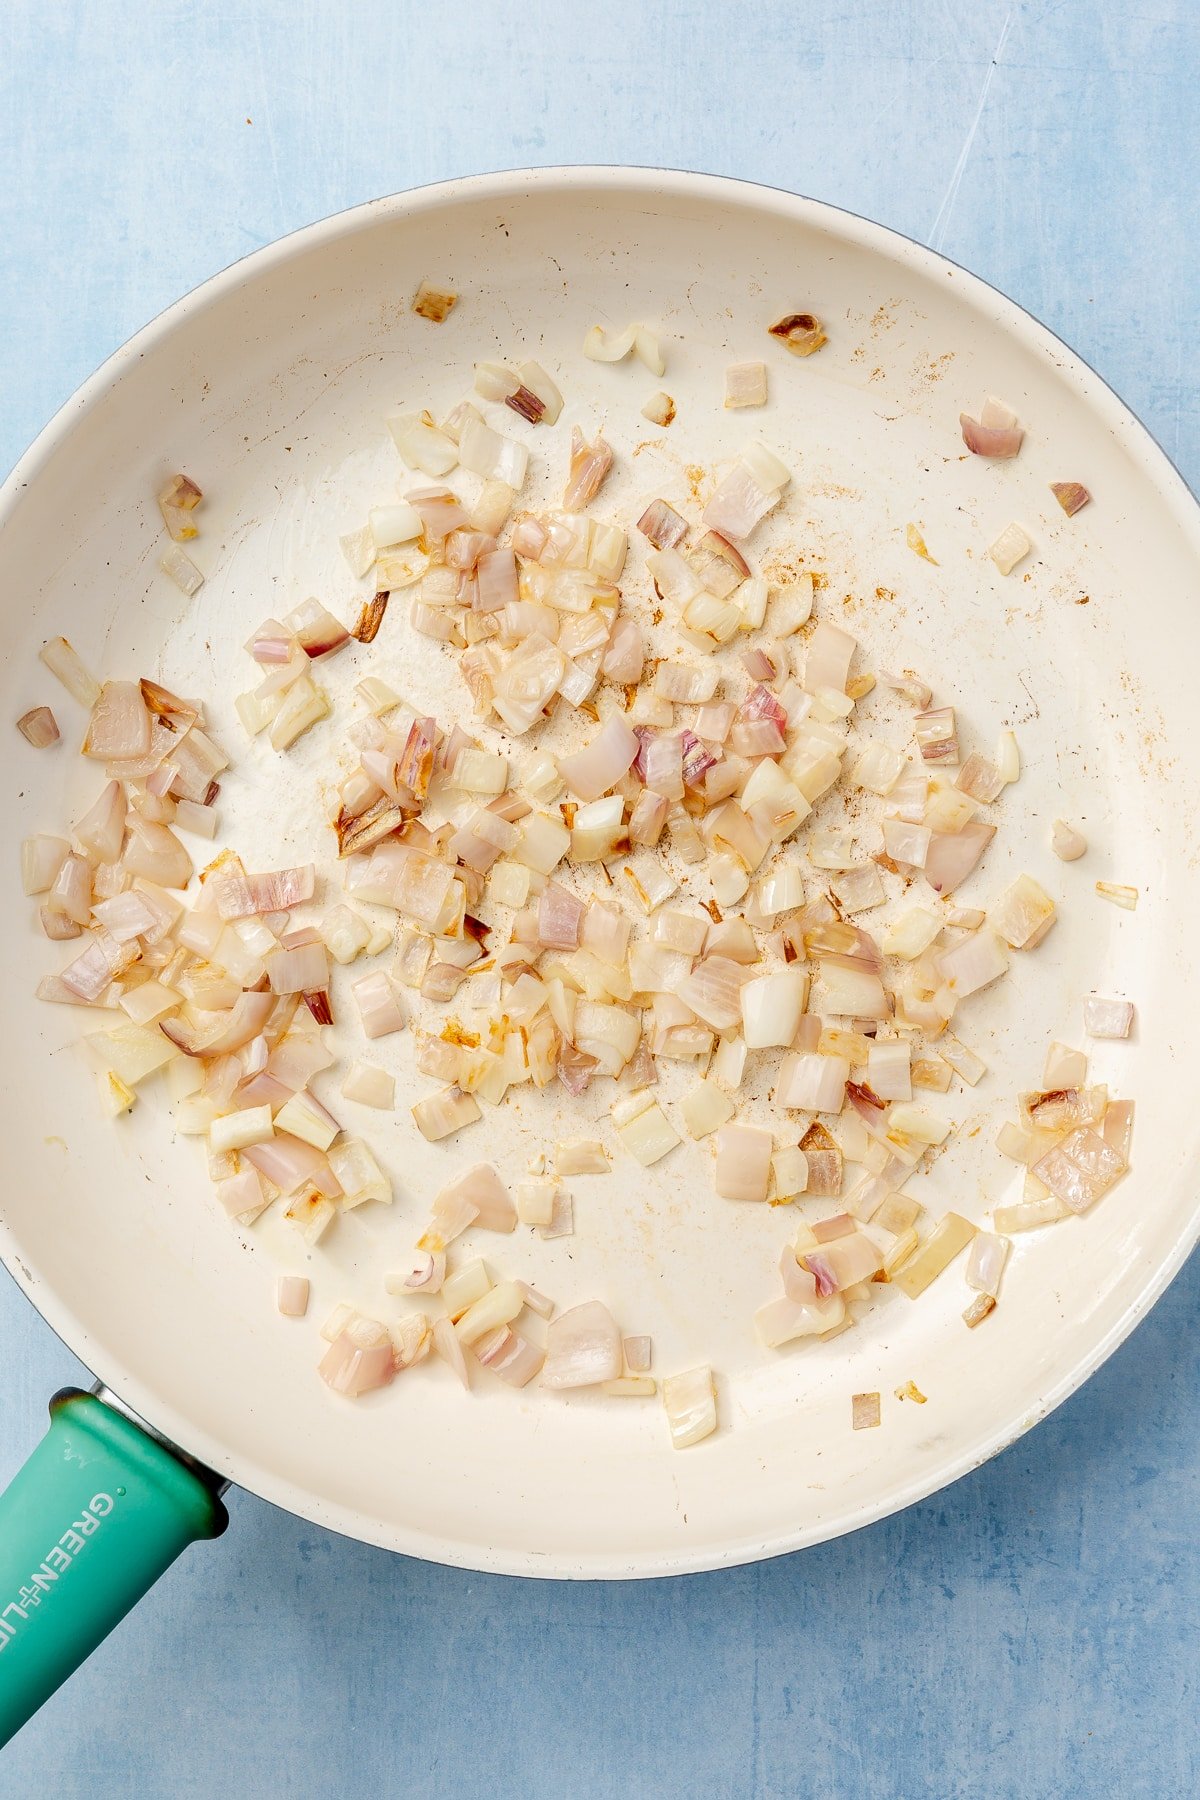 Onions are being lightly browned in a frying pan with a teal handle.